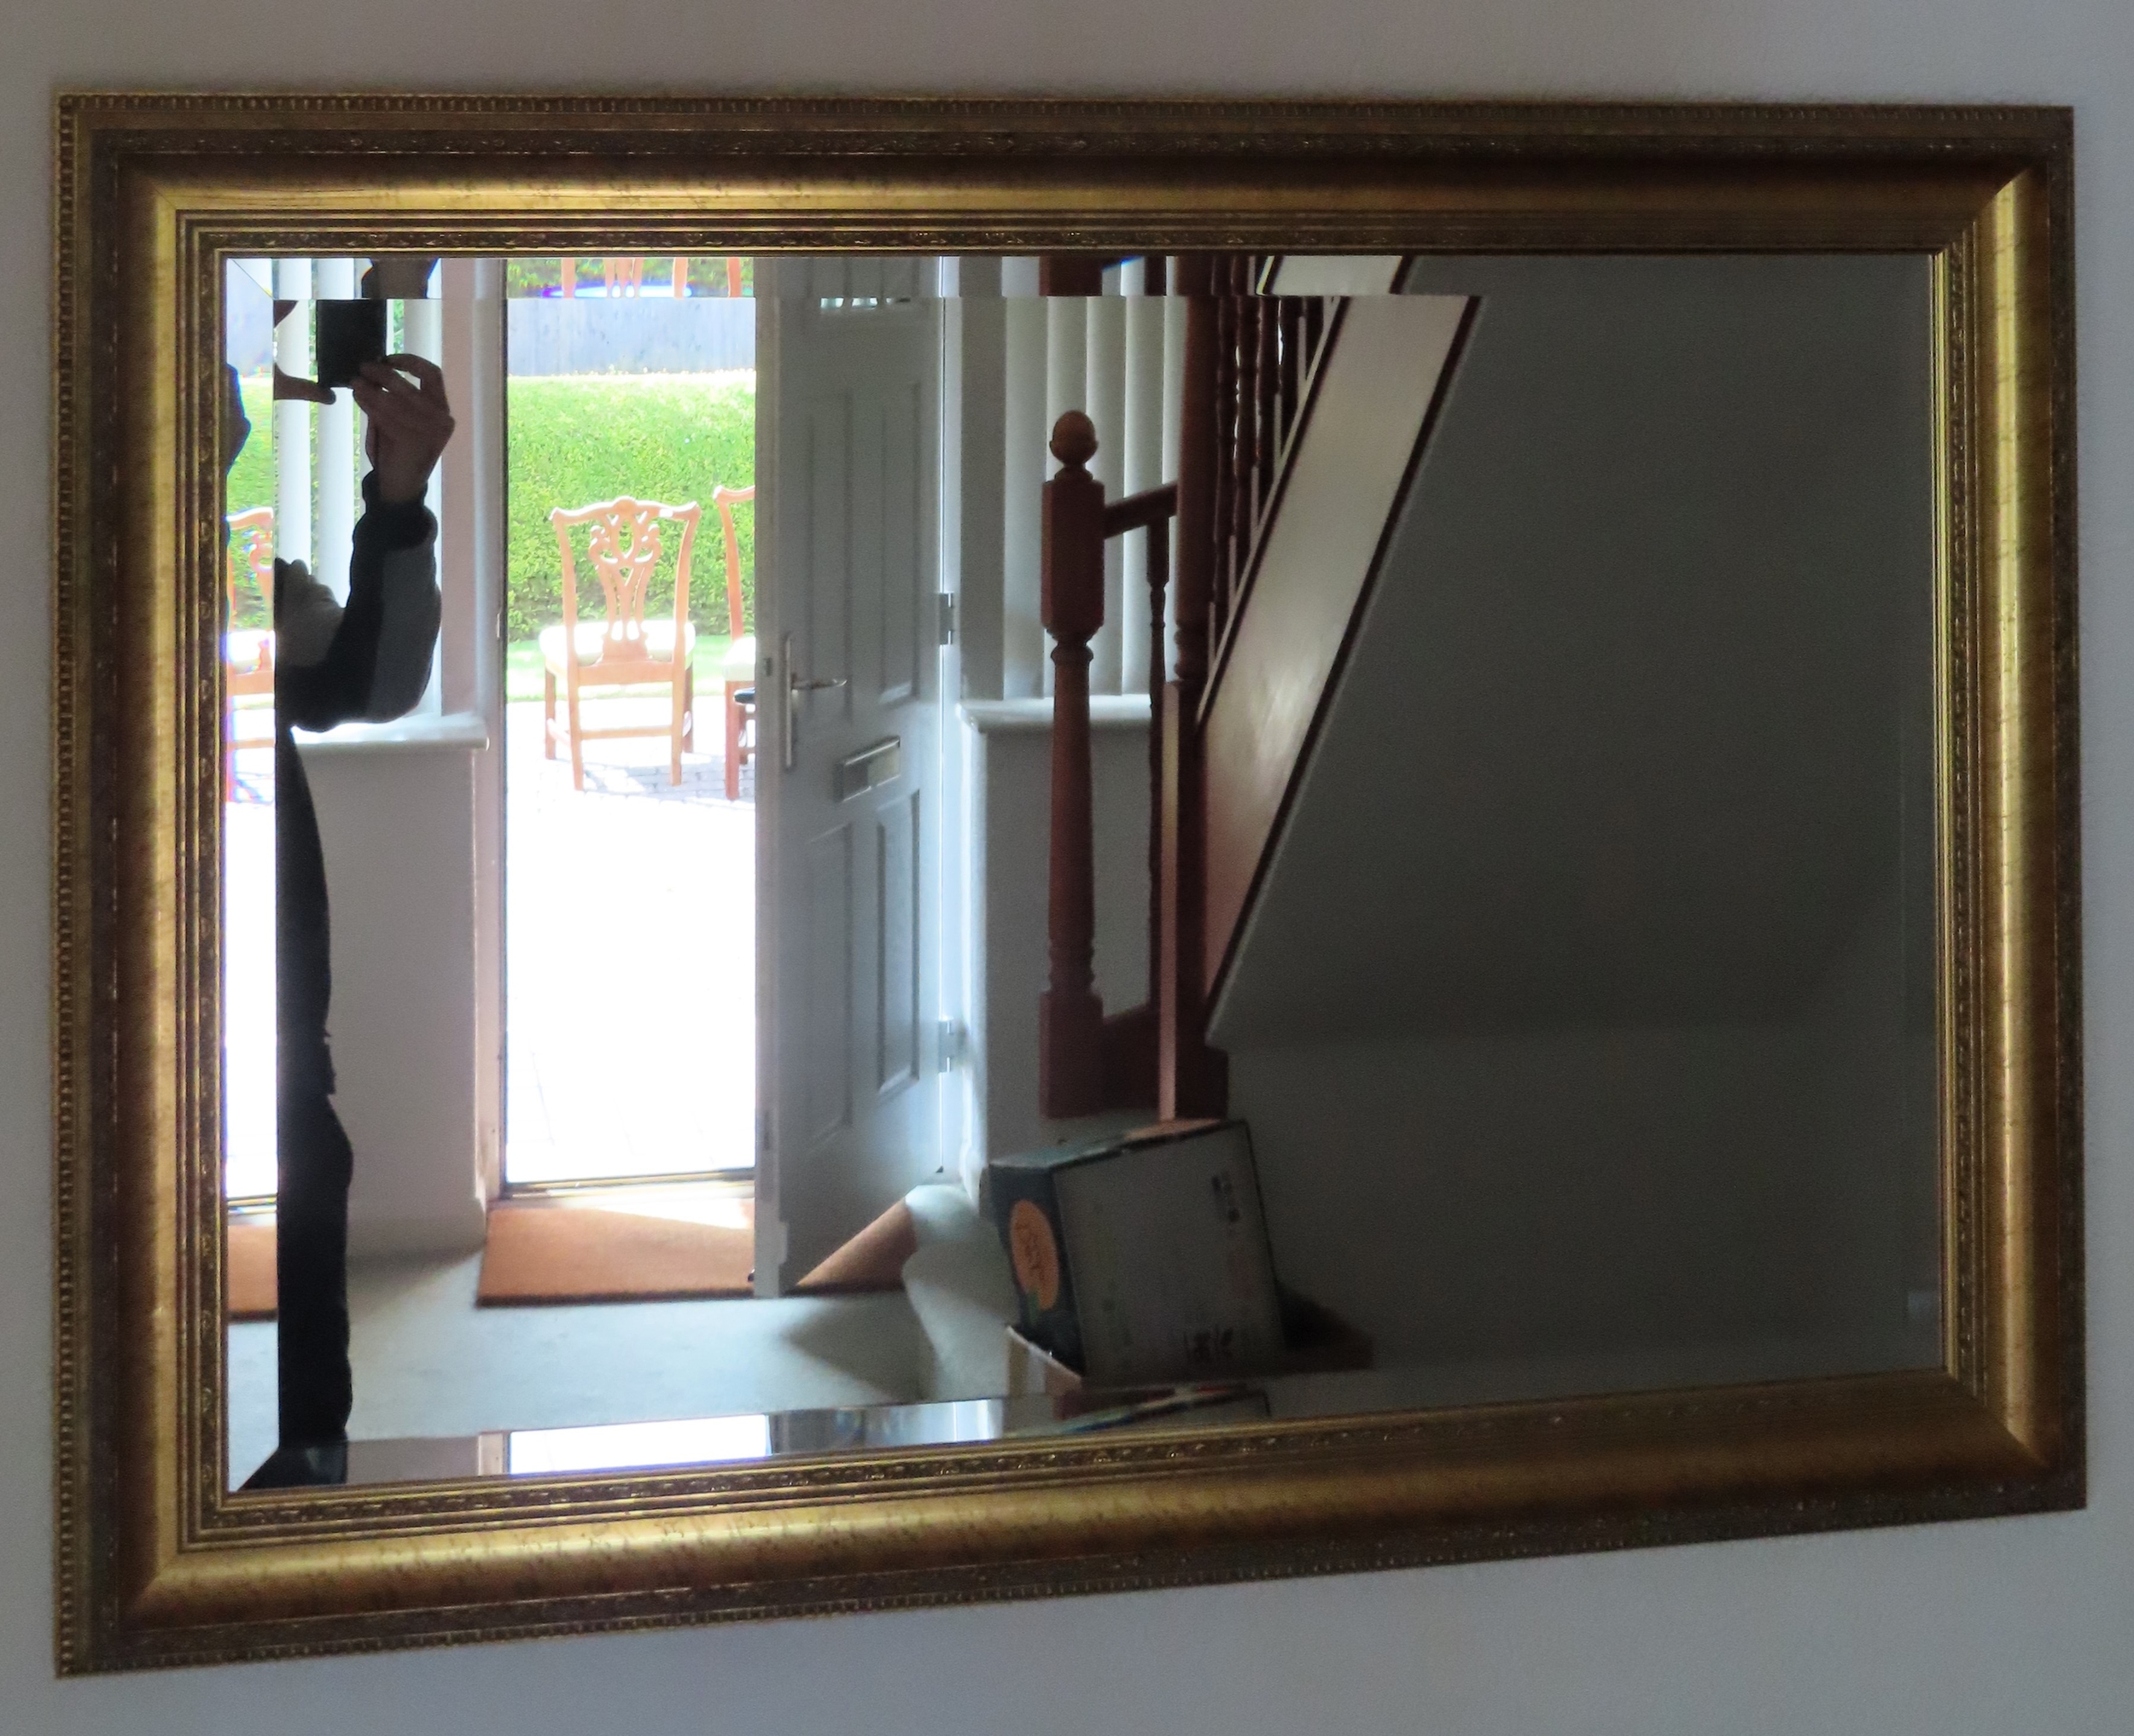 20th century gilded and bevelled wall mirror. Approx. 59 x 87cms reasonable used condition